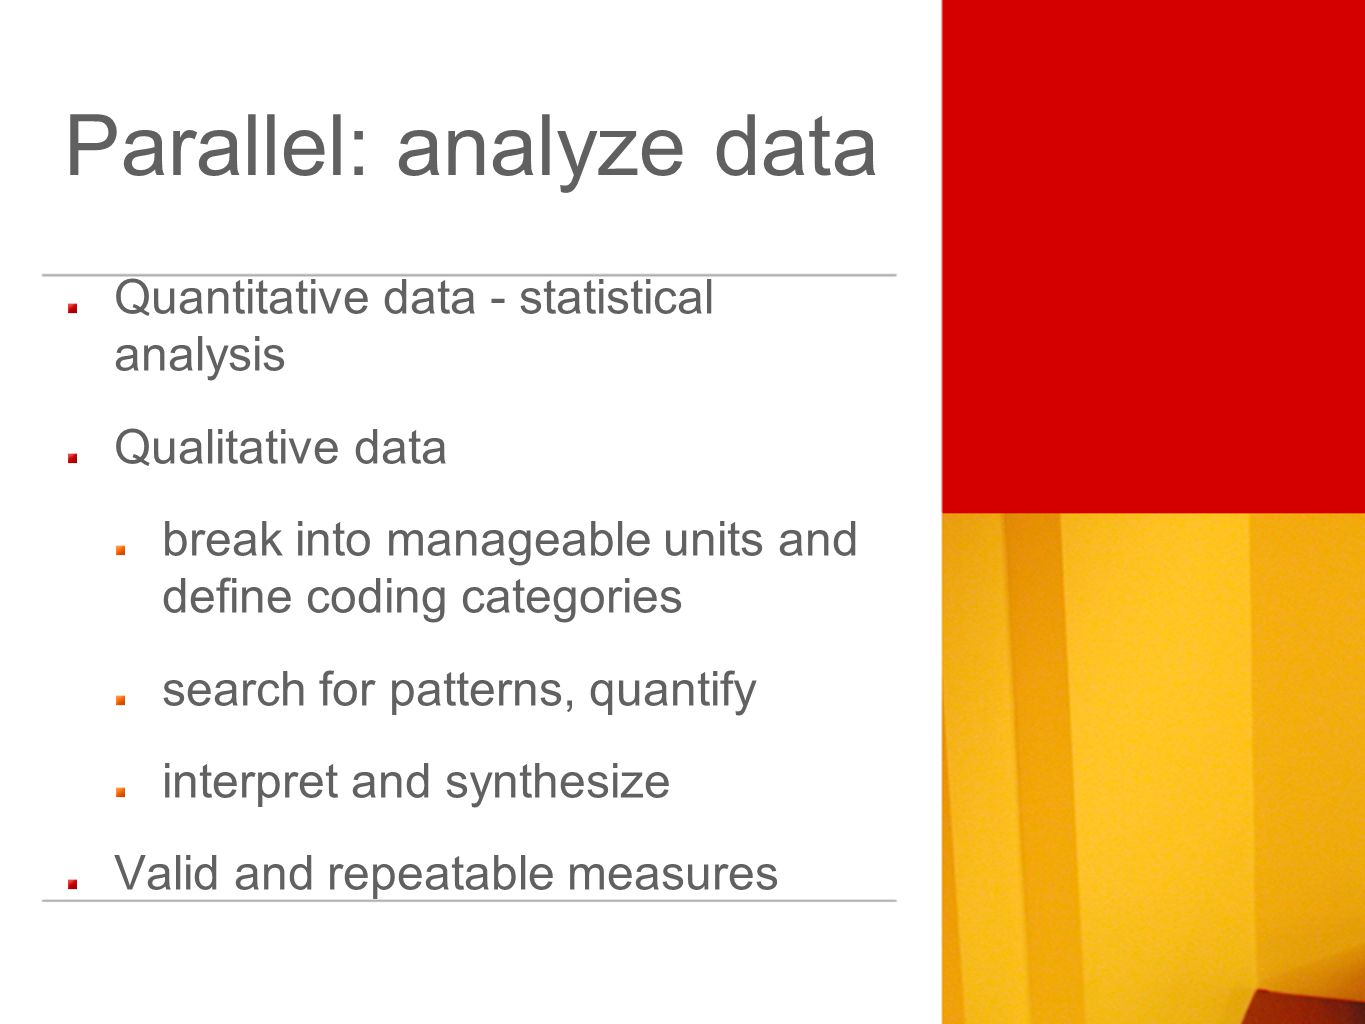 Quantitative data - statistical analysis Qualitative data break into manageable units and define coding categories search for patterns, quantify interpret and synthesize Valid and repeatable measures Parallel: analyze data